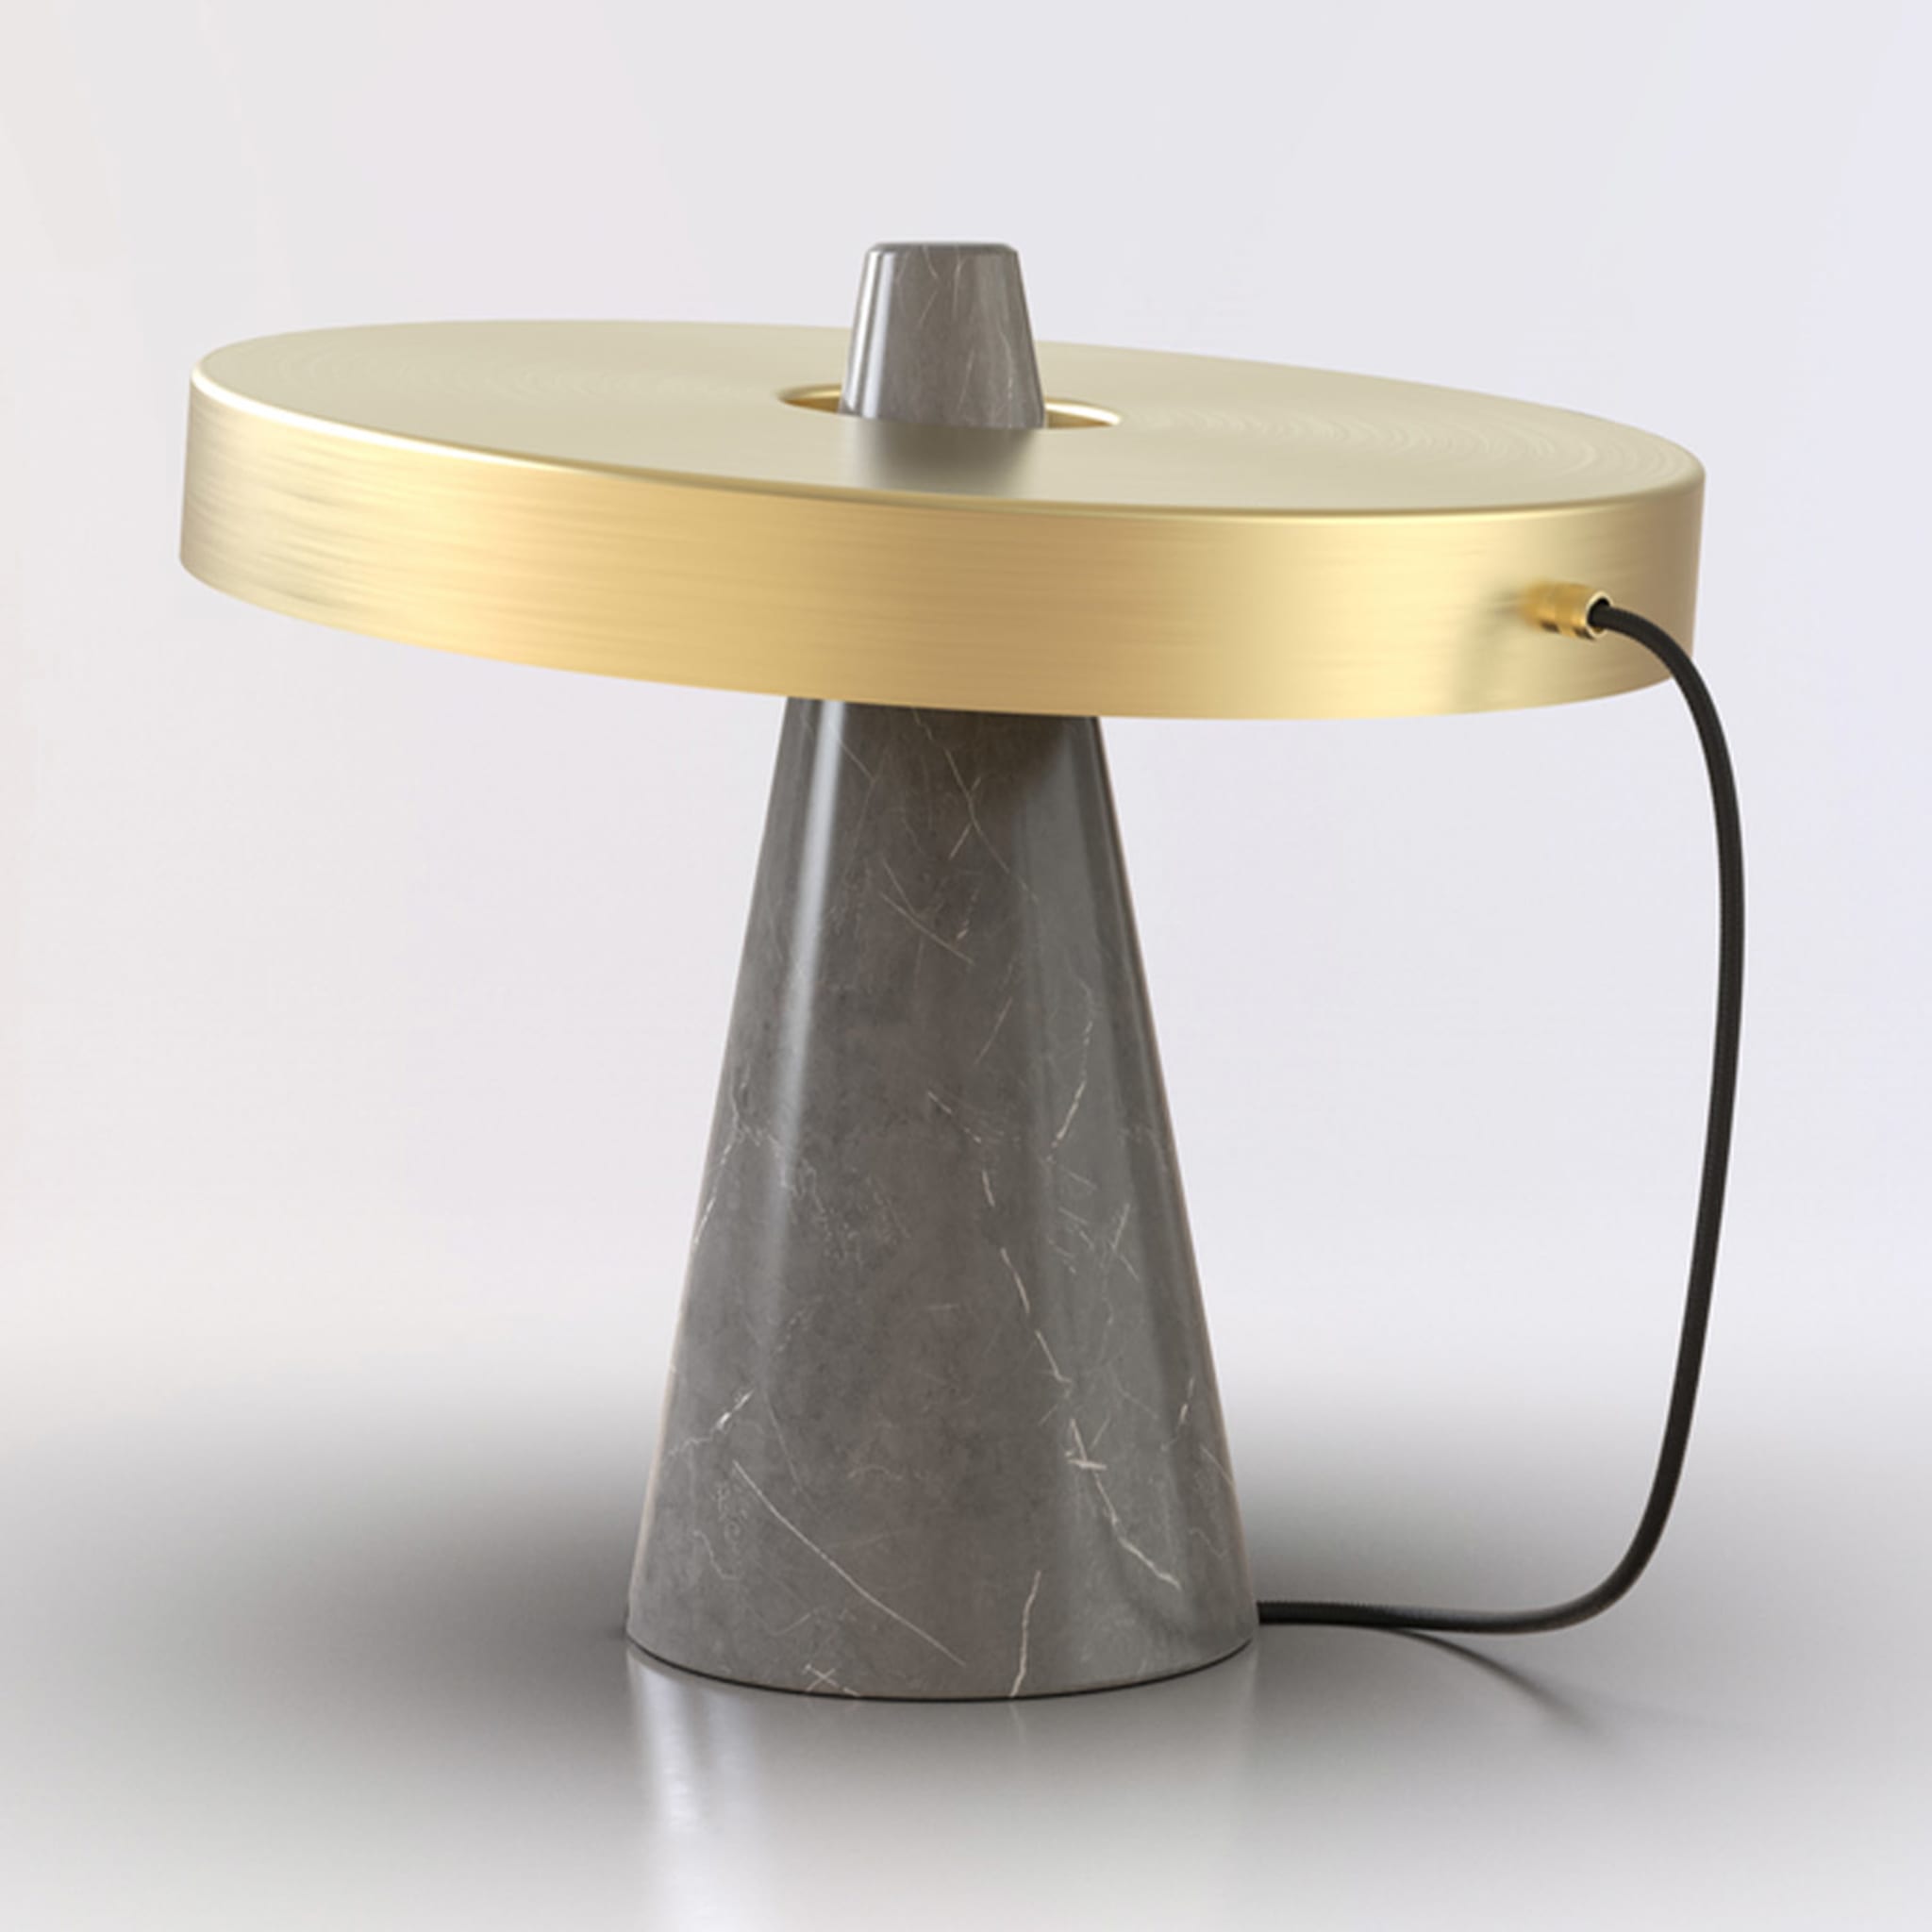 ED039 Grey Stone and Brass Table Lamp - Alternative view 1